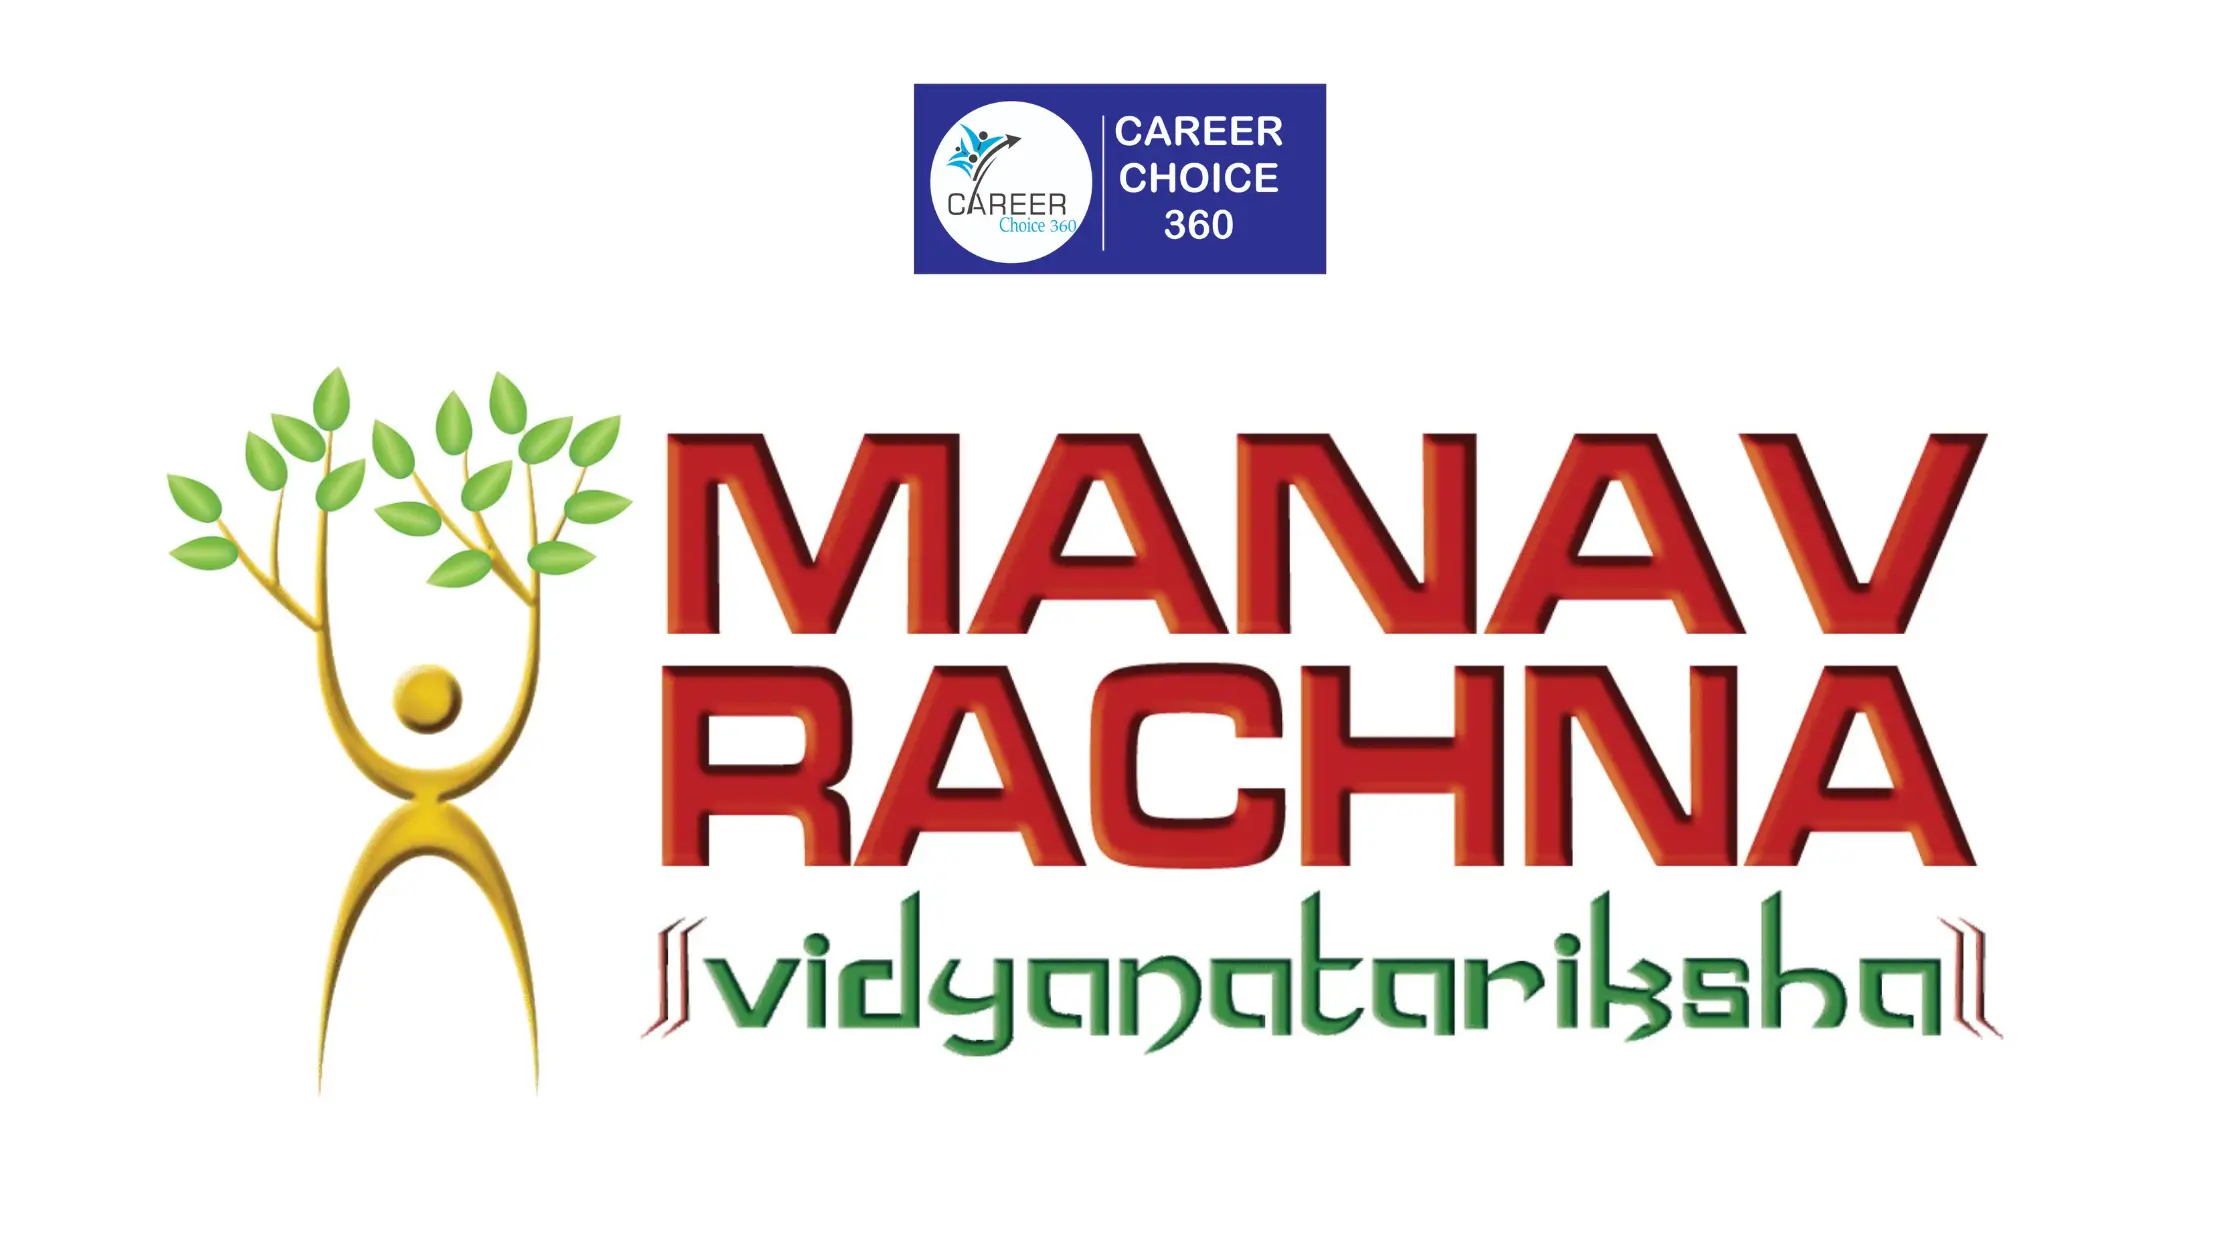 You are currently viewing Manav Rachna University : Highlights, Courses and Fees, Eligibility, Selection Criteria, Admission, Admission Procedure, Placements, Rankings, Scholarship